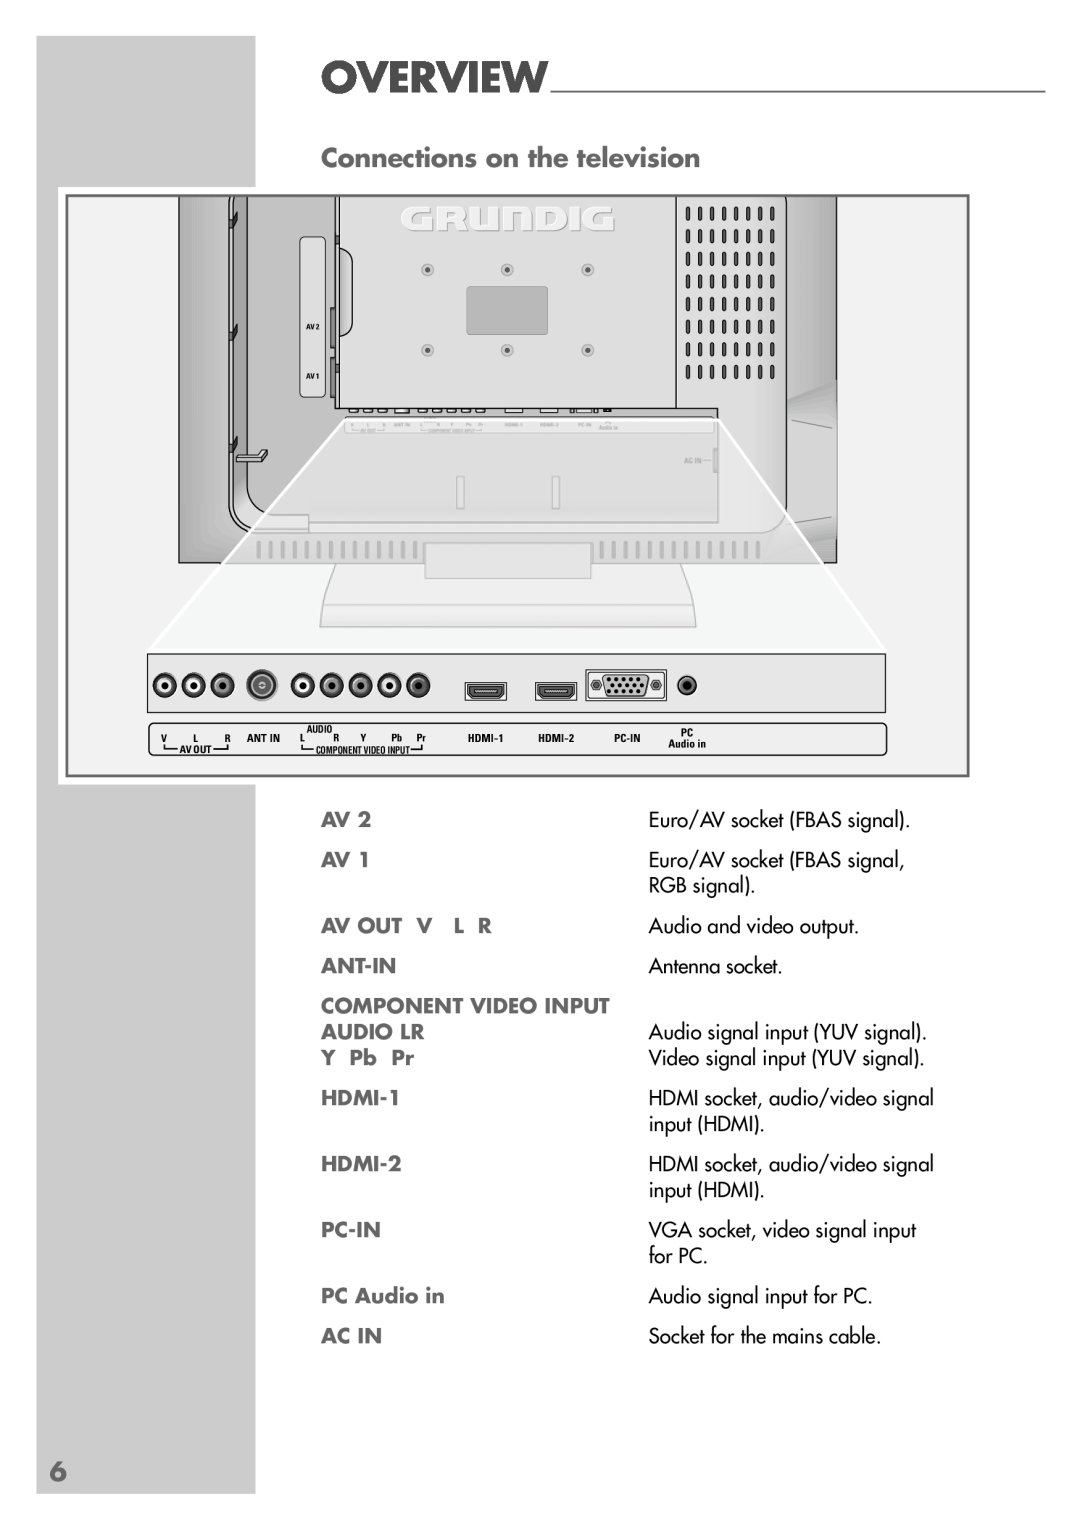 Grundig LXW 82-8720, LXW 68-8720 manual Connections on the television, Overview 